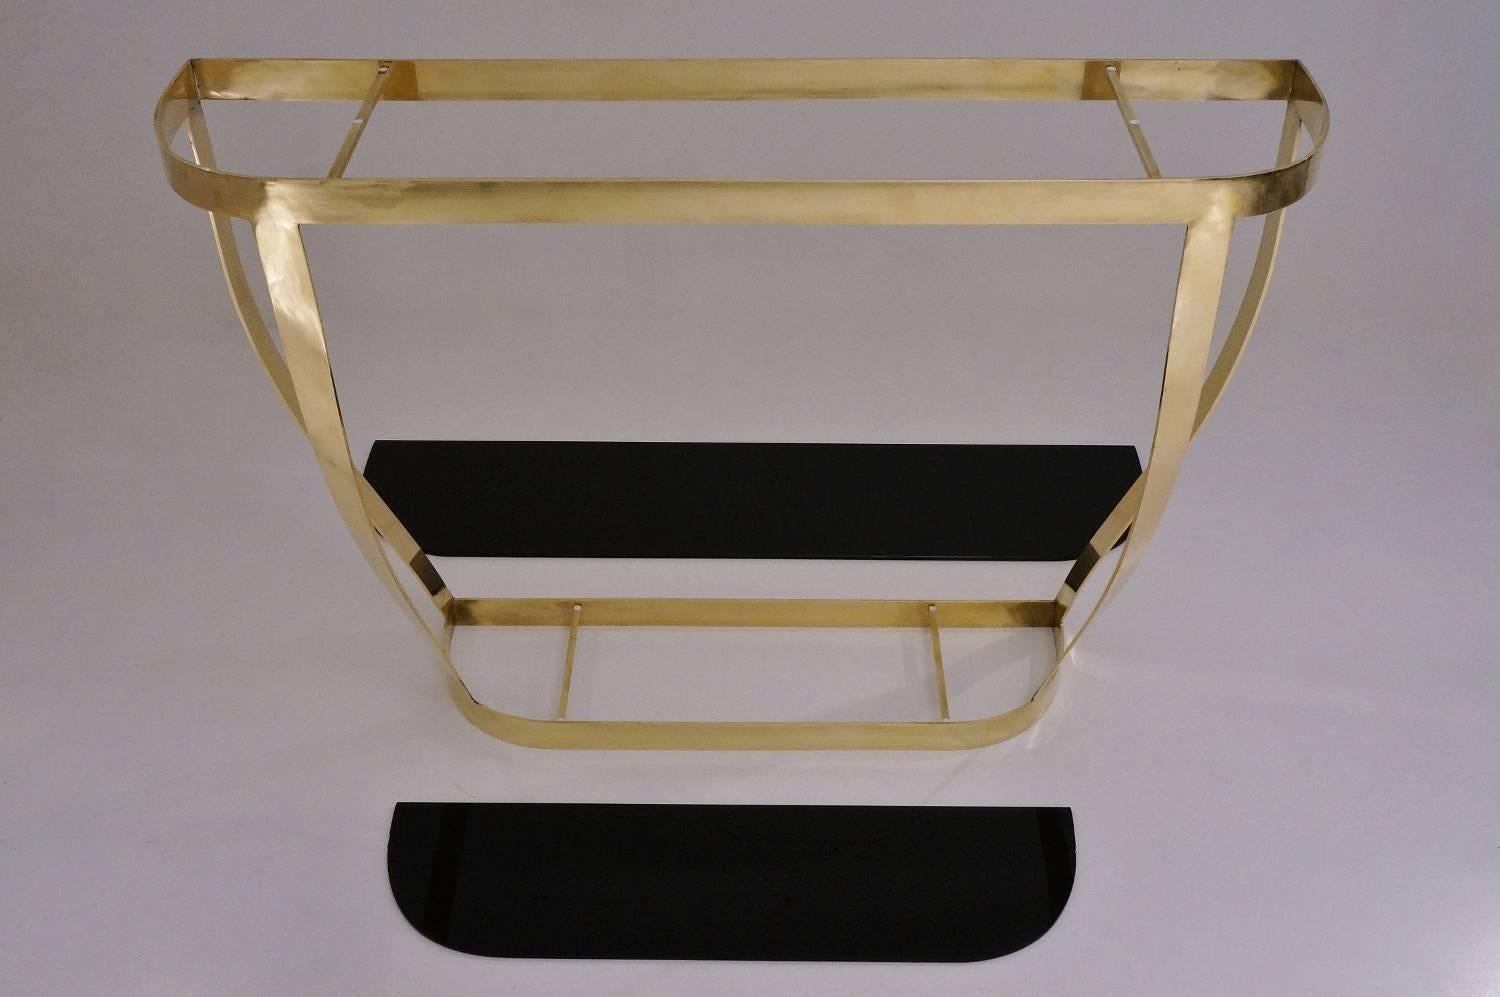 Pair of Console Tables, Solid Brass with Black Glass and Shelf, Italian 5